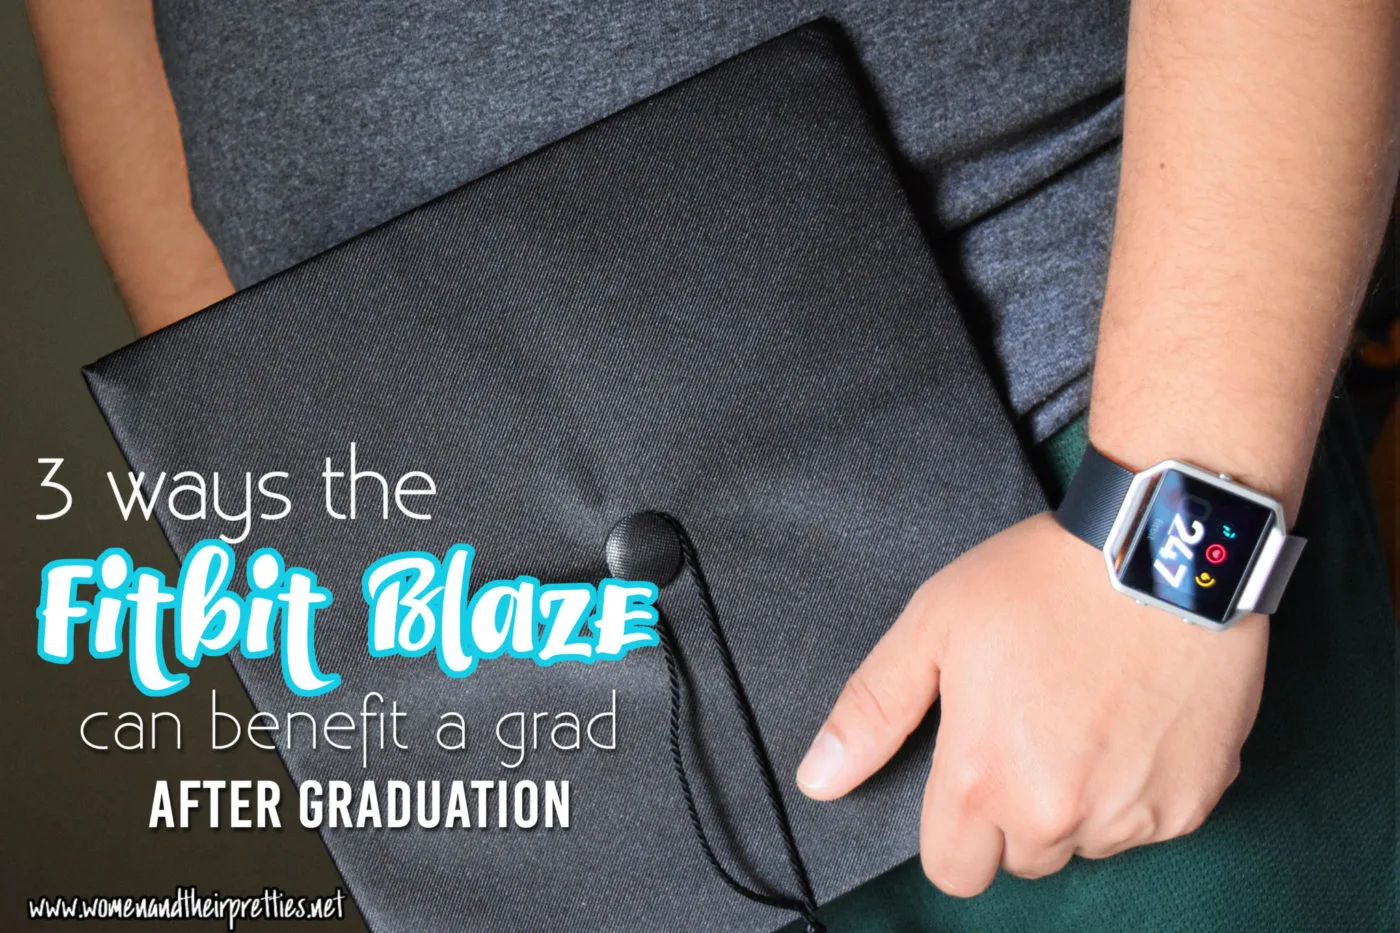 The @Fitbit Blaze is the perfect grad gift for many reasons! Check it all out here and found out where you can buy one today! #GradGifts